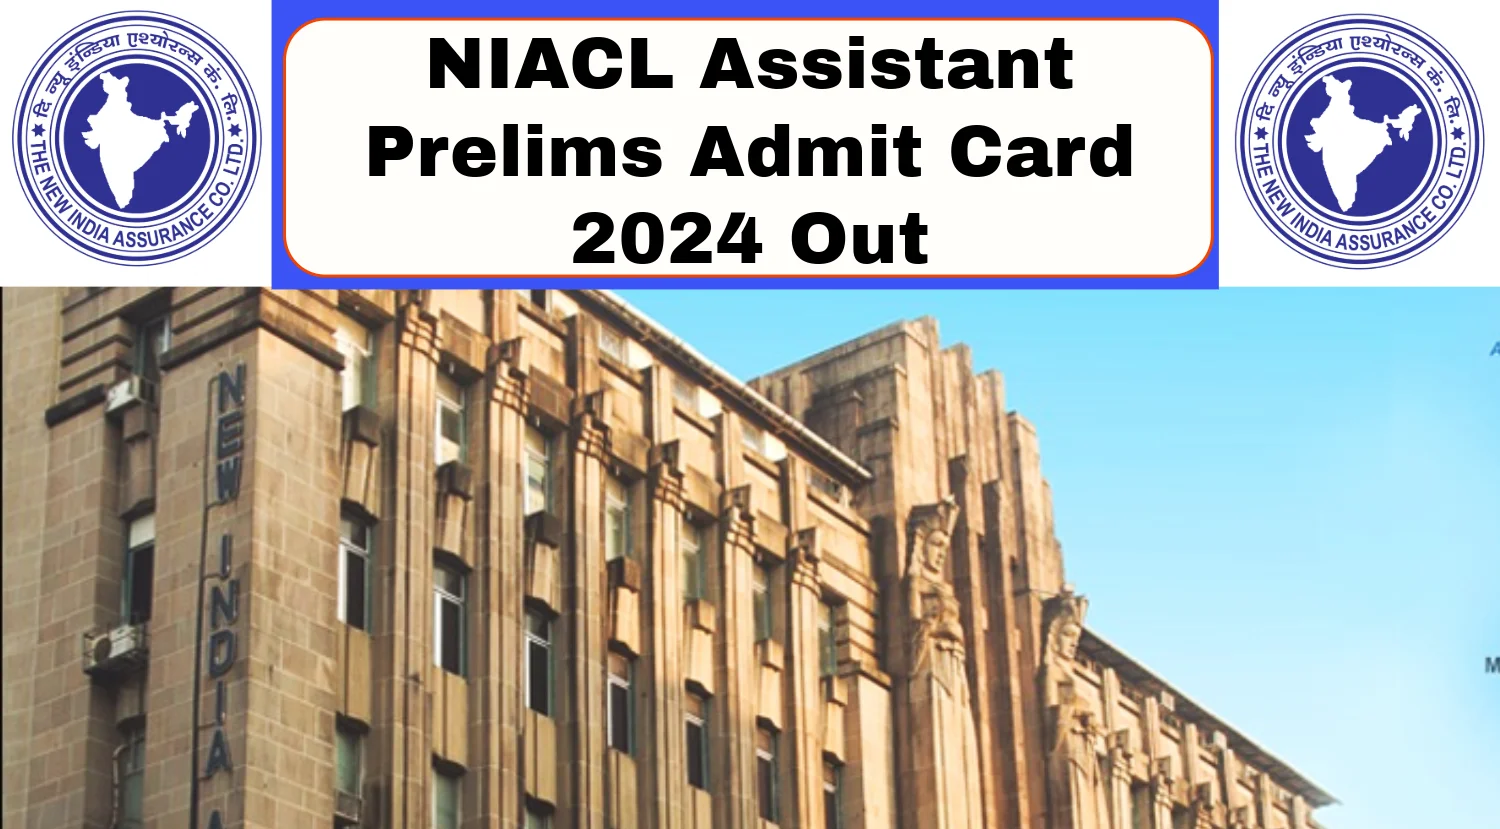 NIACL Assistant Prelims Admit Card 2024 Out